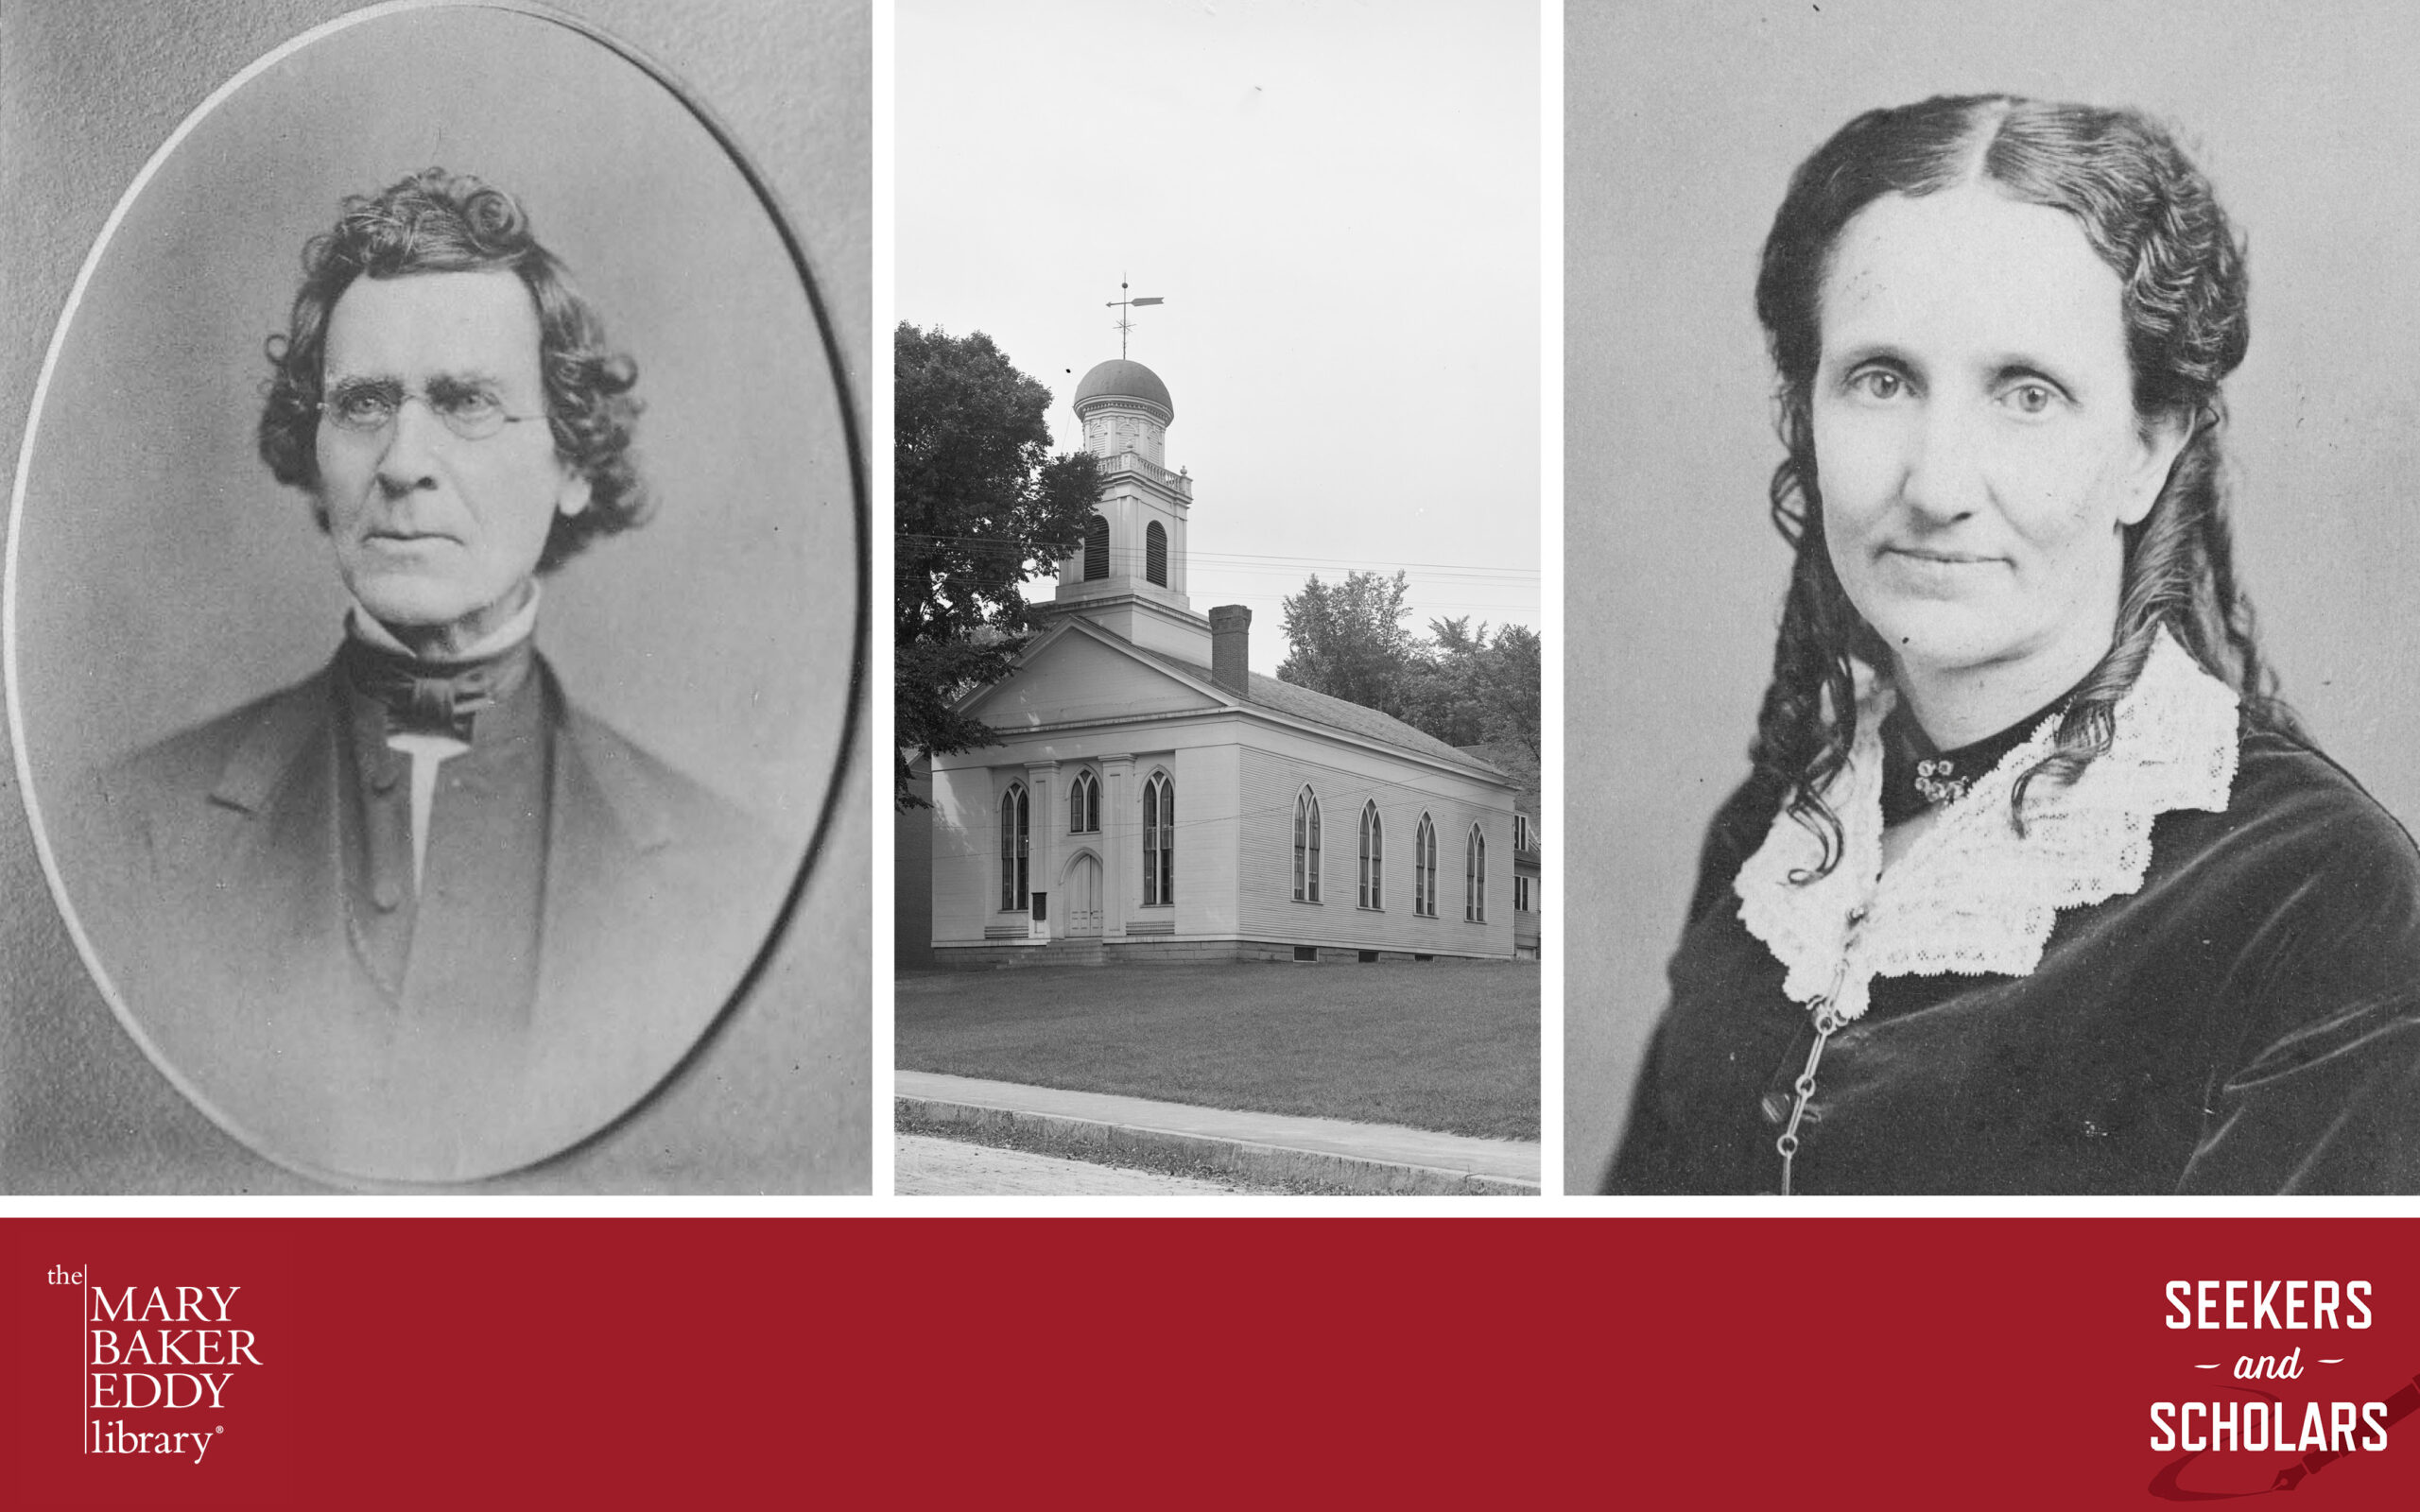 Collage showing a portrait of Nathaniel Bouton; the Congregational Church in Plymouth, New Hampshire; and Mary Baker Eddy, circa 1871.